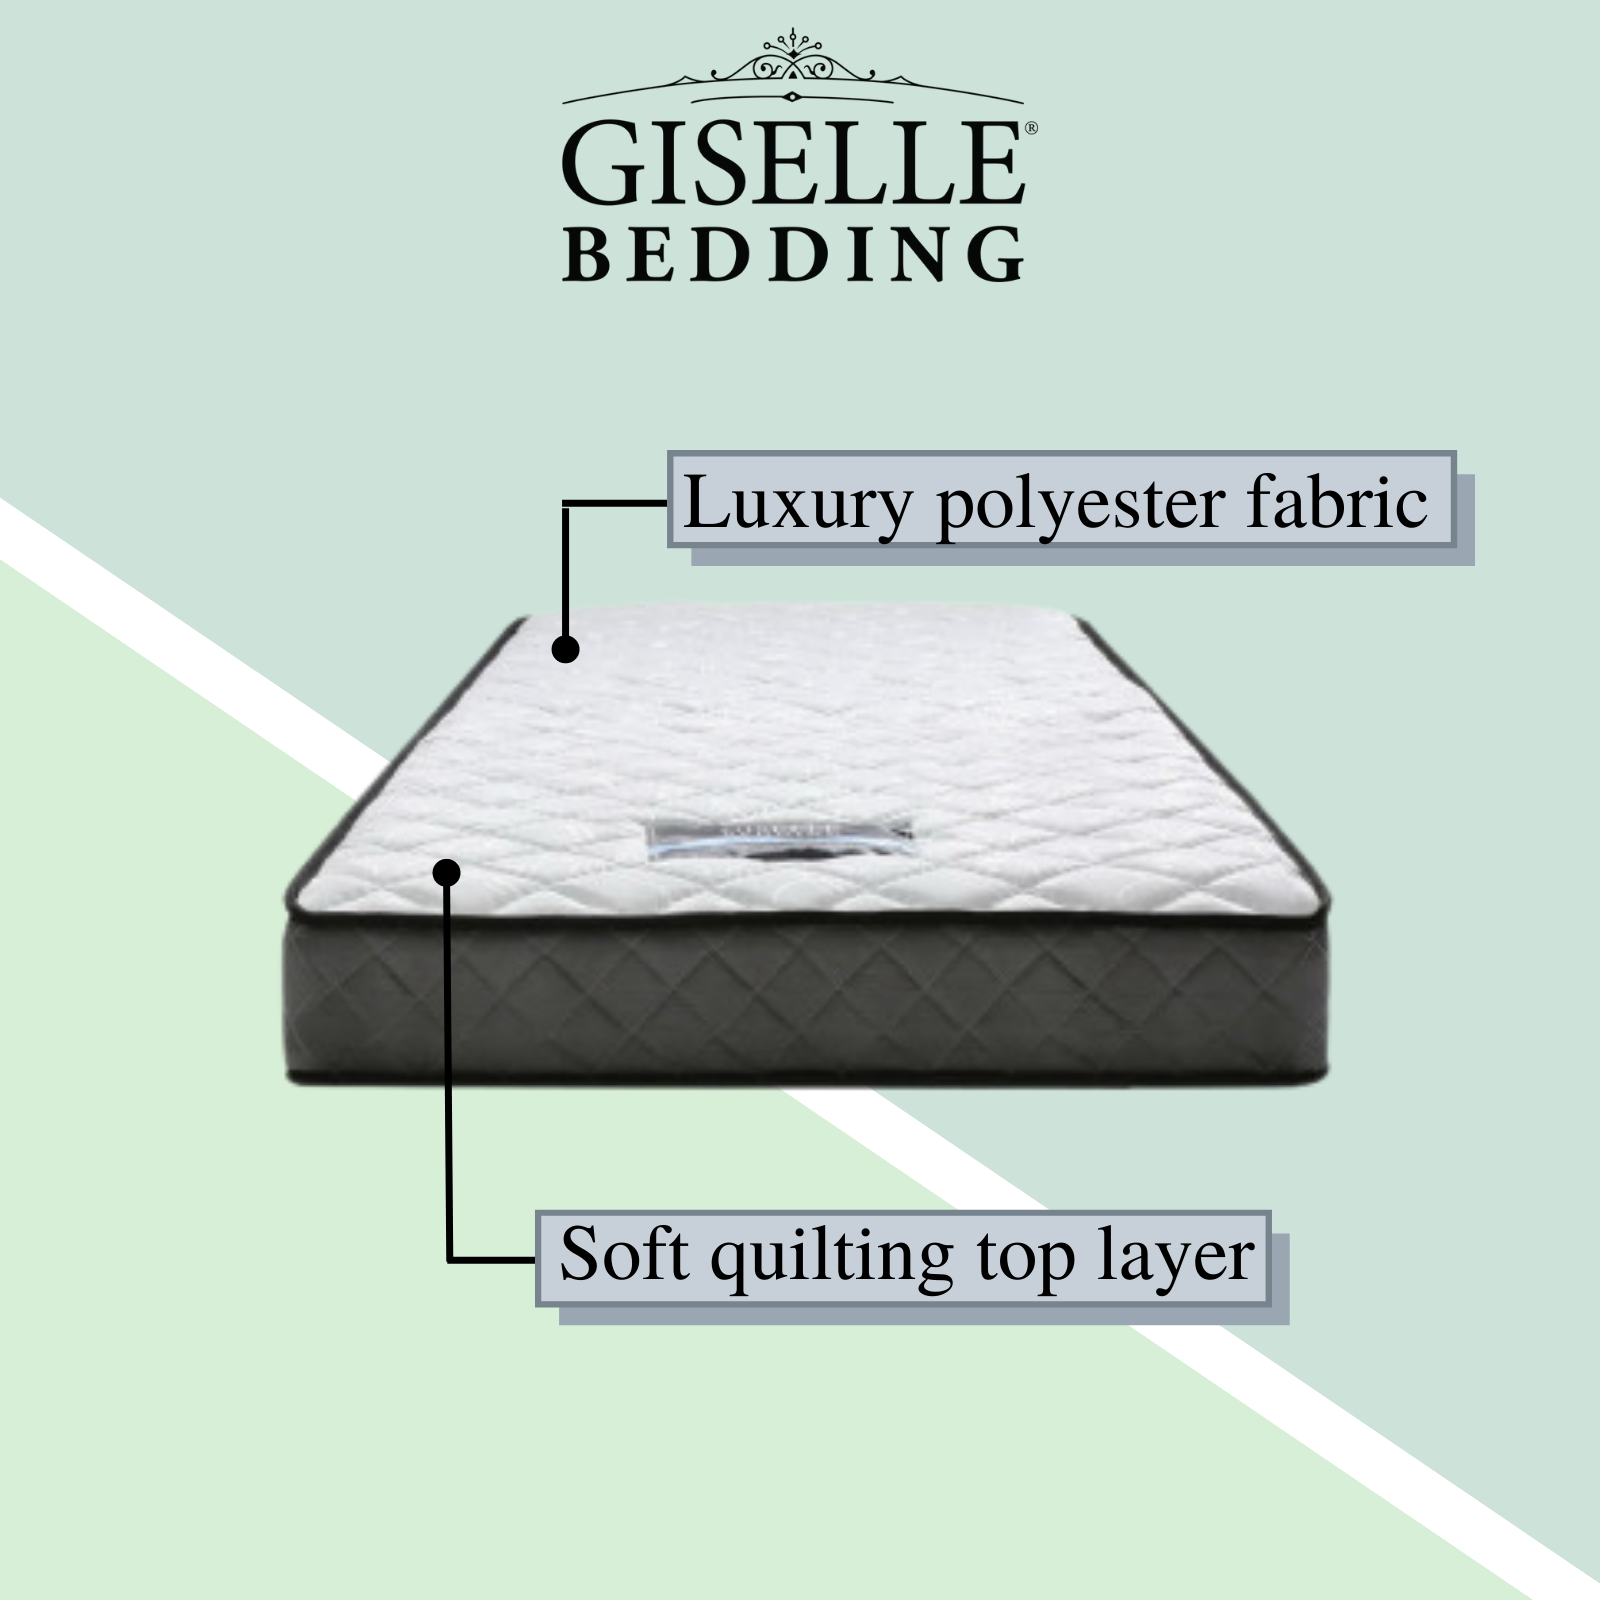 Giselle Bedding Alzbeta Spring Mattress features luxury polyester fabric, soft quilting top layer